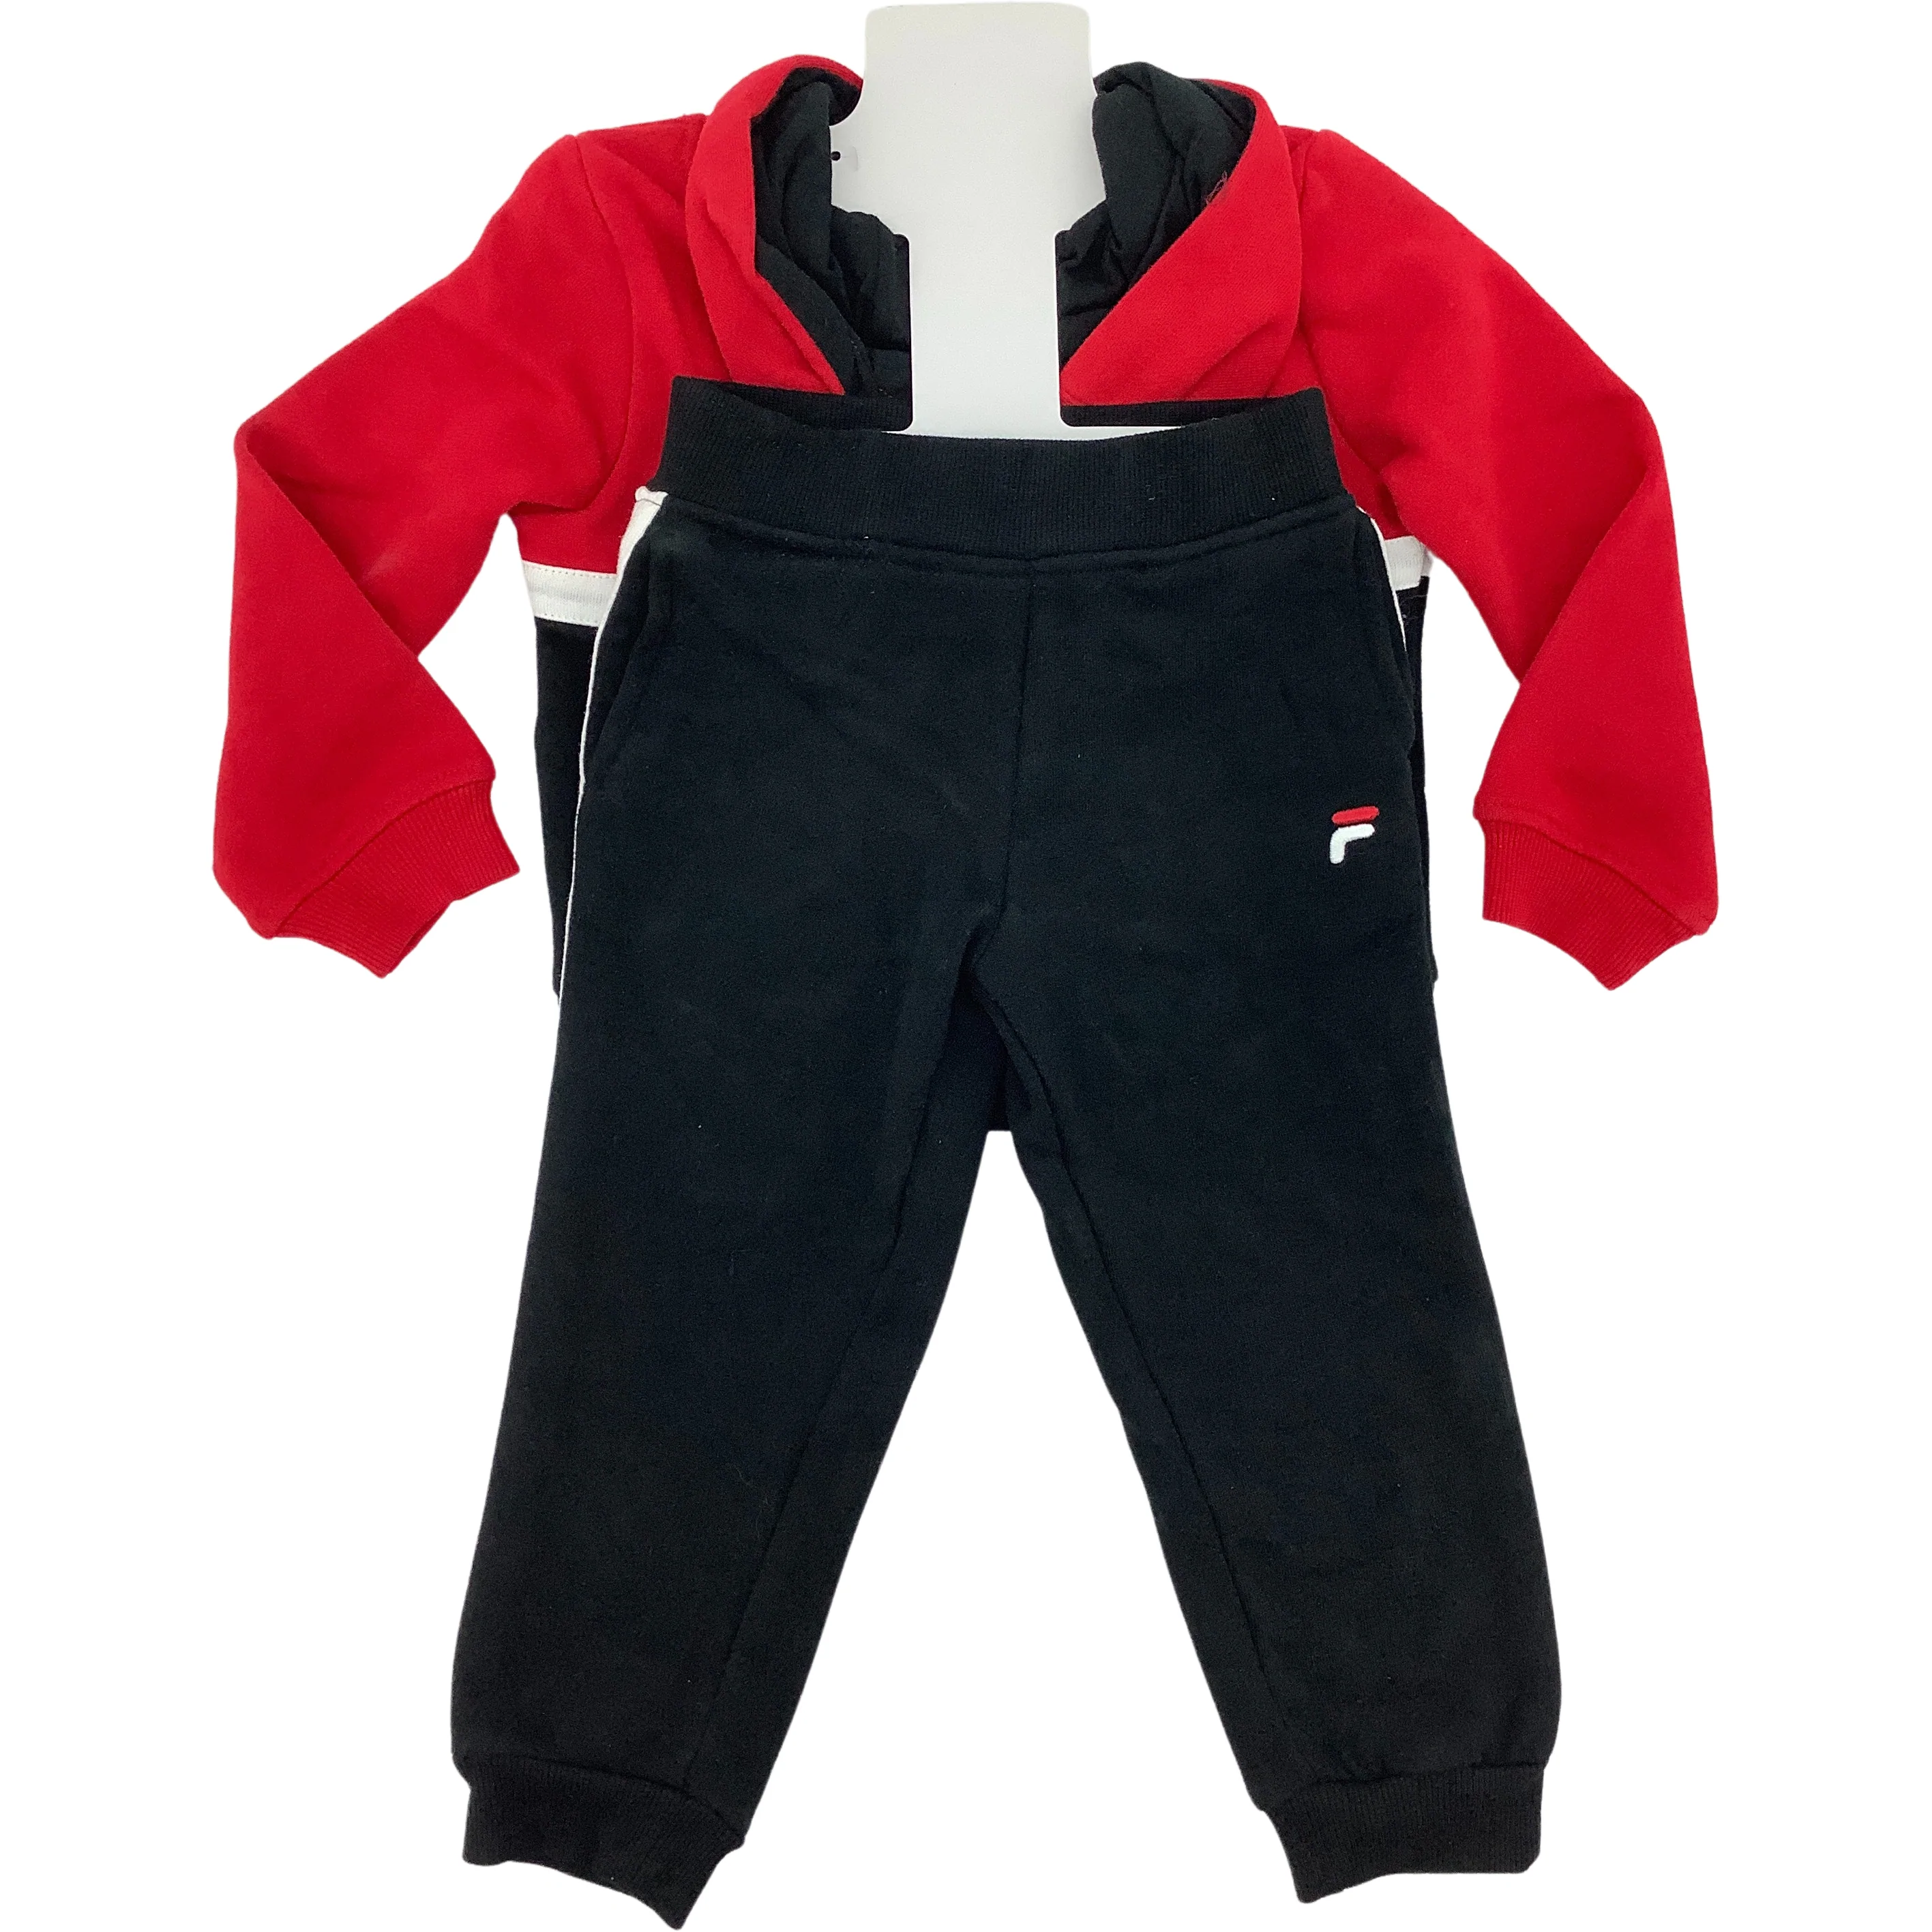 Fila Boy's 2 Piece Set / Sweater and Pants Set / Red and Black / Size 2T